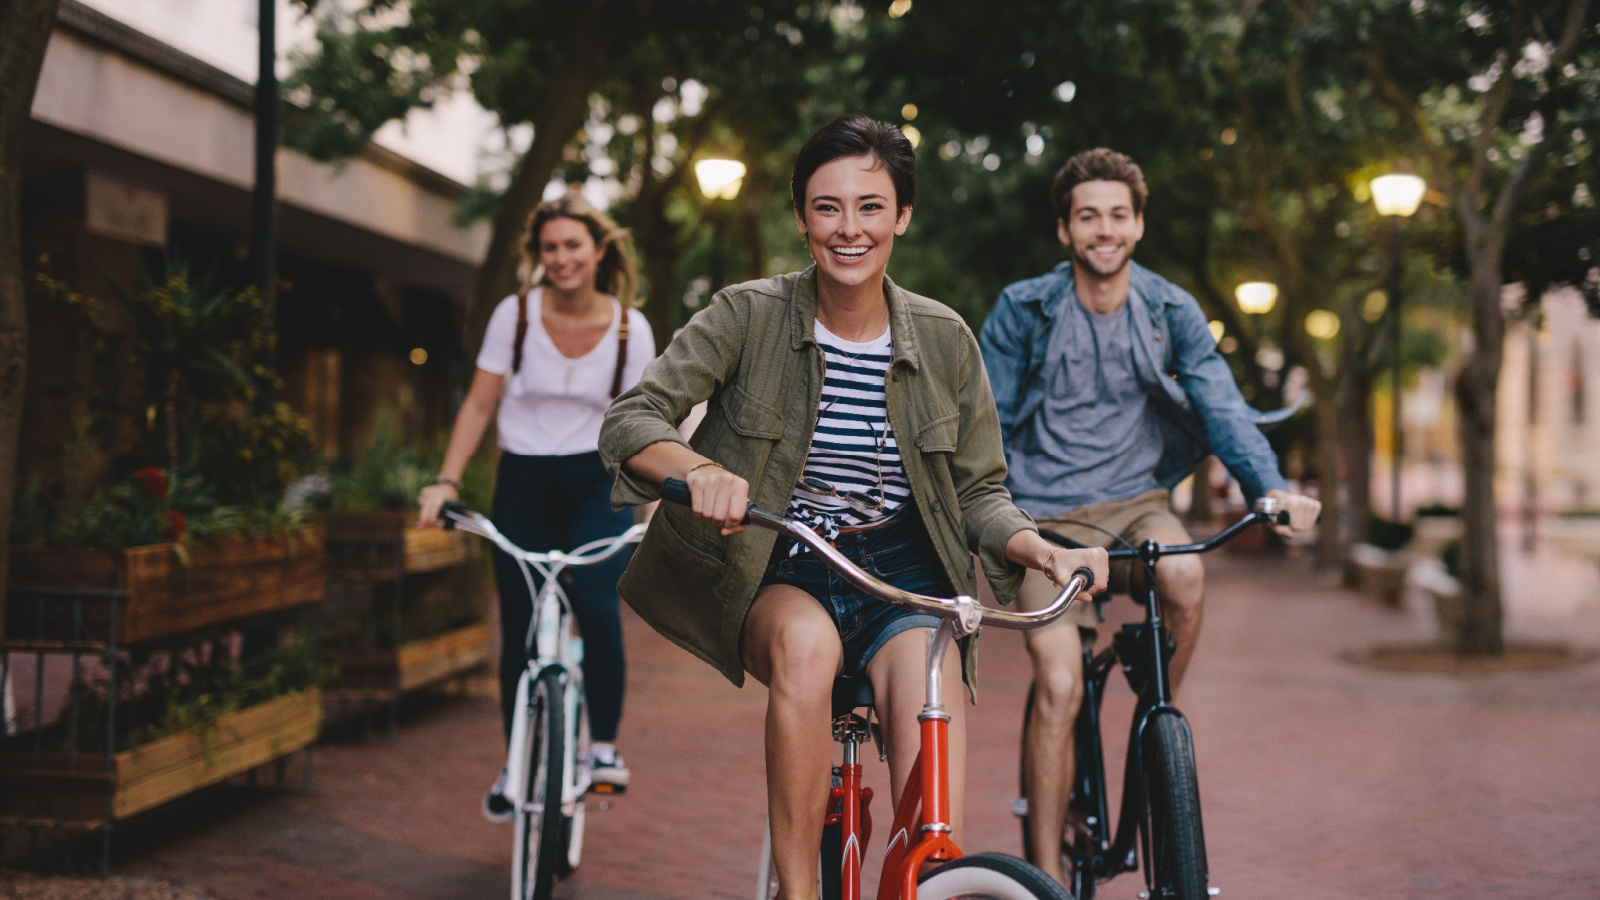 image credit: Jacob-Lund/Shutterstock <p>Consider cycling to work a few days a week if it’s feasible. Not only will you get your heart rate up, but you’ll also reduce your carbon footprint. It’s a chance to enjoy the fresh air and wake up your body before starting the workday. Plus, you’ll arrive at work with a clear mind, ready to tackle the day ahead.</p>